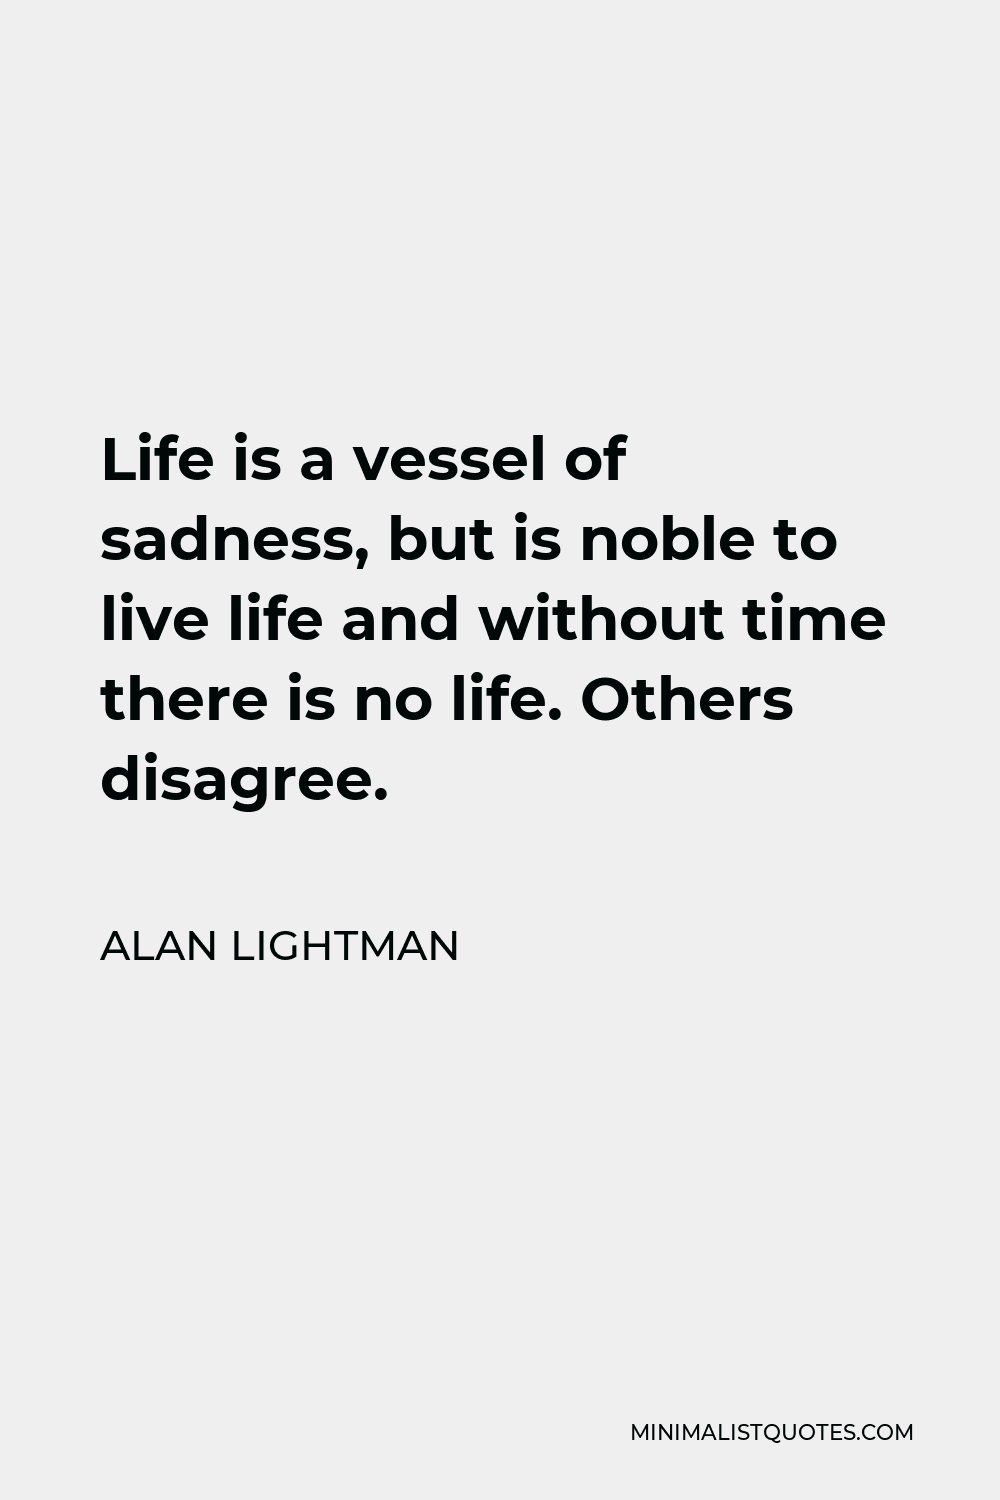 Alan Lightman Quote - Life is a vessel of sadness, but is noble to live life and without time there is no life. Others disagree.